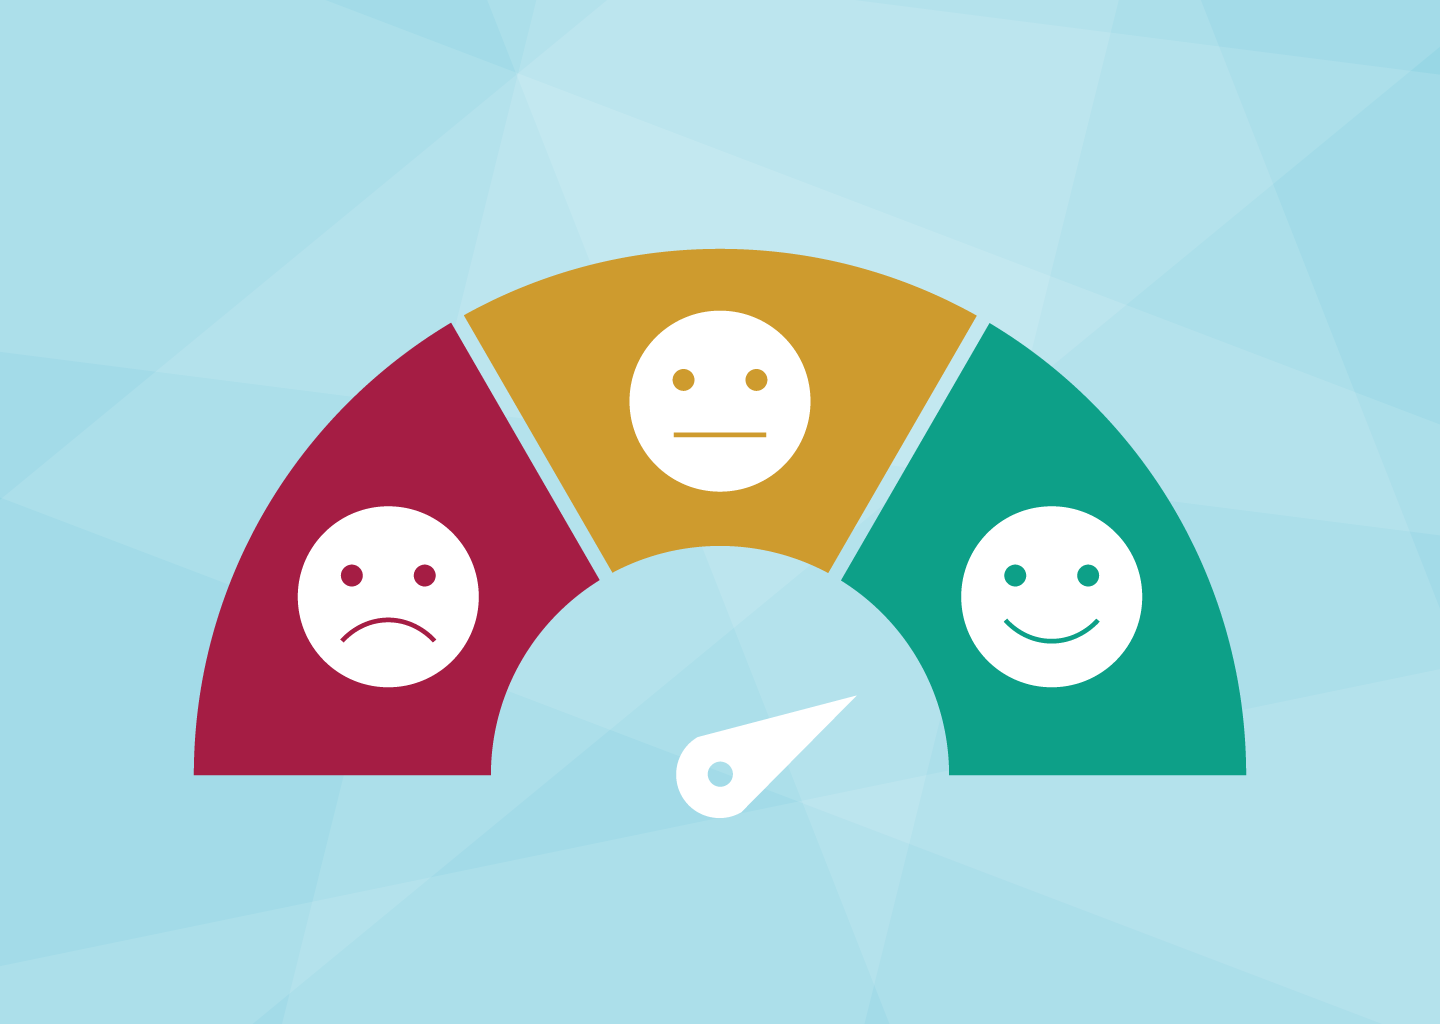 How to Collect Member Feedback the Right Way14 Ways to Improve Your Organization's Member Experience